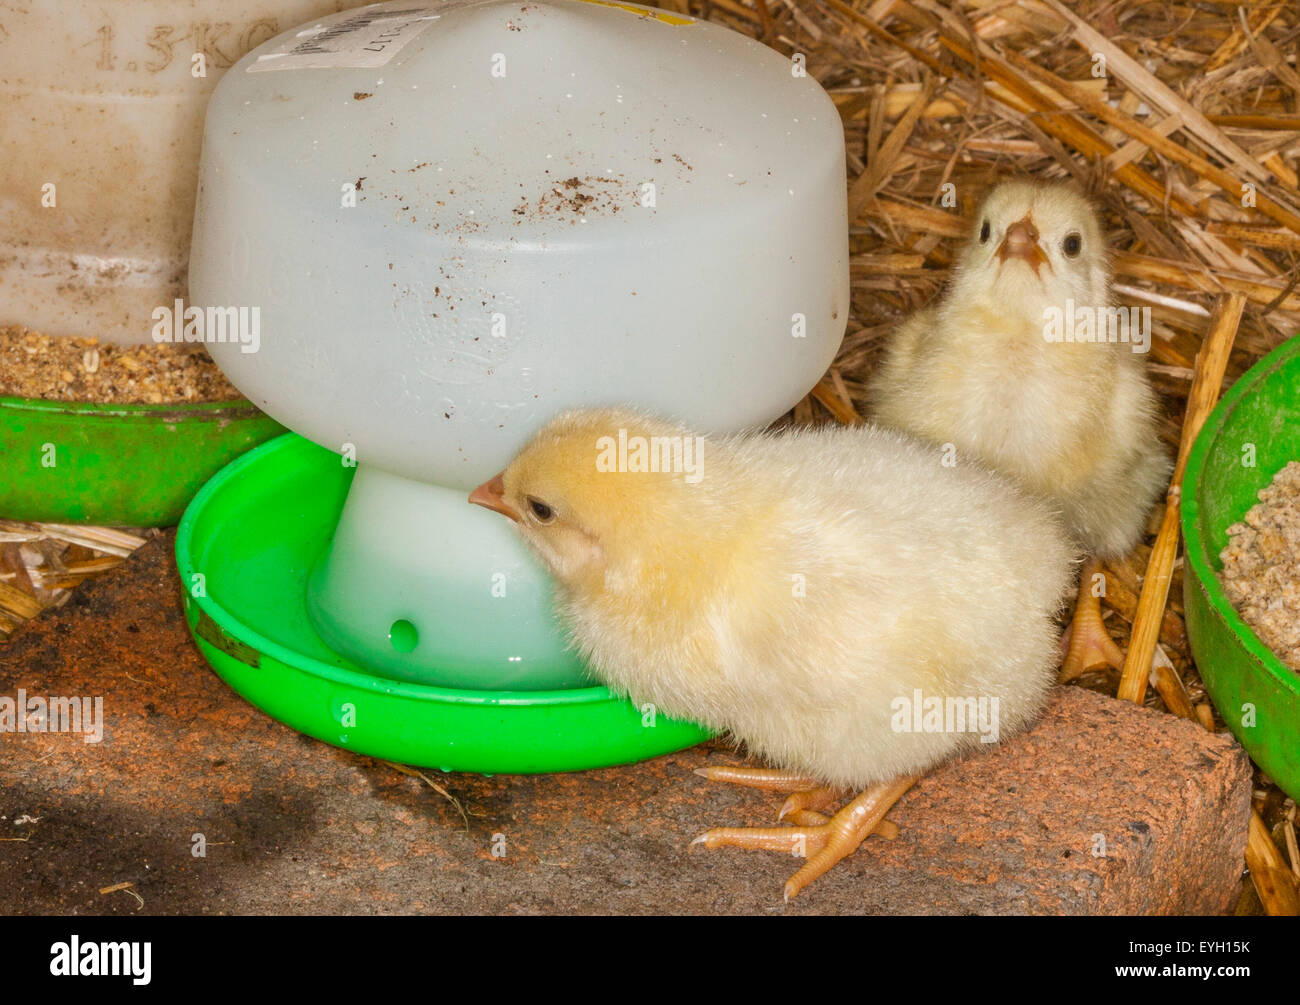 The bar is open, chicks having a drink at the water dispenser Stock Photo